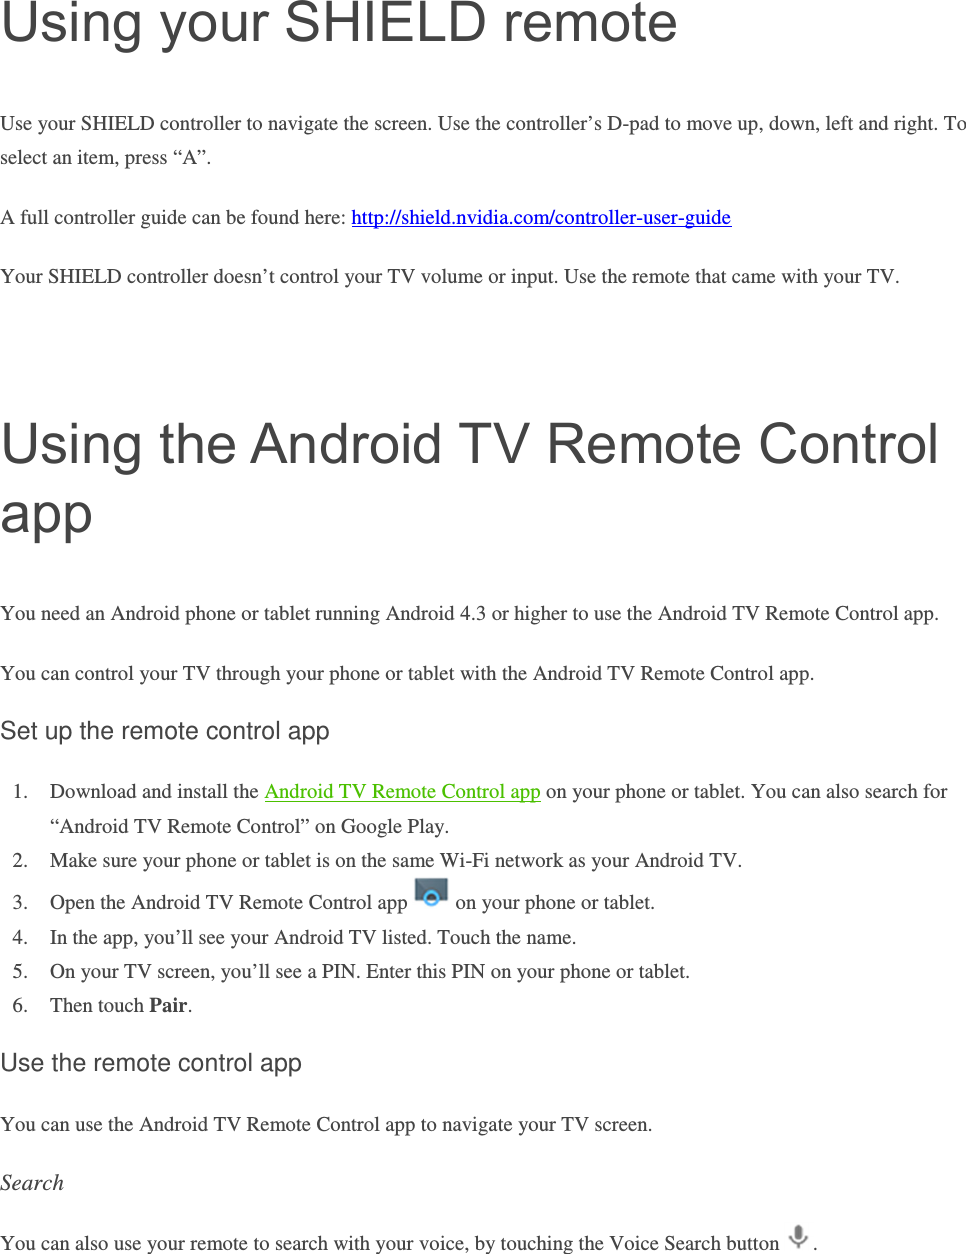 Using your SHIELD remote Use your SHIELD controller to navigate the screen. Use the controller’s D-pad to move up, down, left and right. To select an item, press “A”. A full controller guide can be found here: http://shield.nvidia.com/controller-user-guide Your SHIELD controller doesn’t control your TV volume or input. Use the remote that came with your TV.   Using the Android TV Remote Control app You need an Android phone or tablet running Android 4.3 or higher to use the Android TV Remote Control app. You can control your TV through your phone or tablet with the Android TV Remote Control app. Set up the remote control app 1. Download and install the Android TV Remote Control app on your phone or tablet. You can also search for “Android TV Remote Control” on Google Play. 2. Make sure your phone or tablet is on the same Wi-Fi network as your Android TV. 3. Open the Android TV Remote Control app   on your phone or tablet. 4. In the app, you’ll see your Android TV listed. Touch the name. 5. On your TV screen, you’ll see a PIN. Enter this PIN on your phone or tablet.  6. Then touch Pair.   Use the remote control app You can use the Android TV Remote Control app to navigate your TV screen. Search You can also use your remote to search with your voice, by touching the Voice Search button  . 